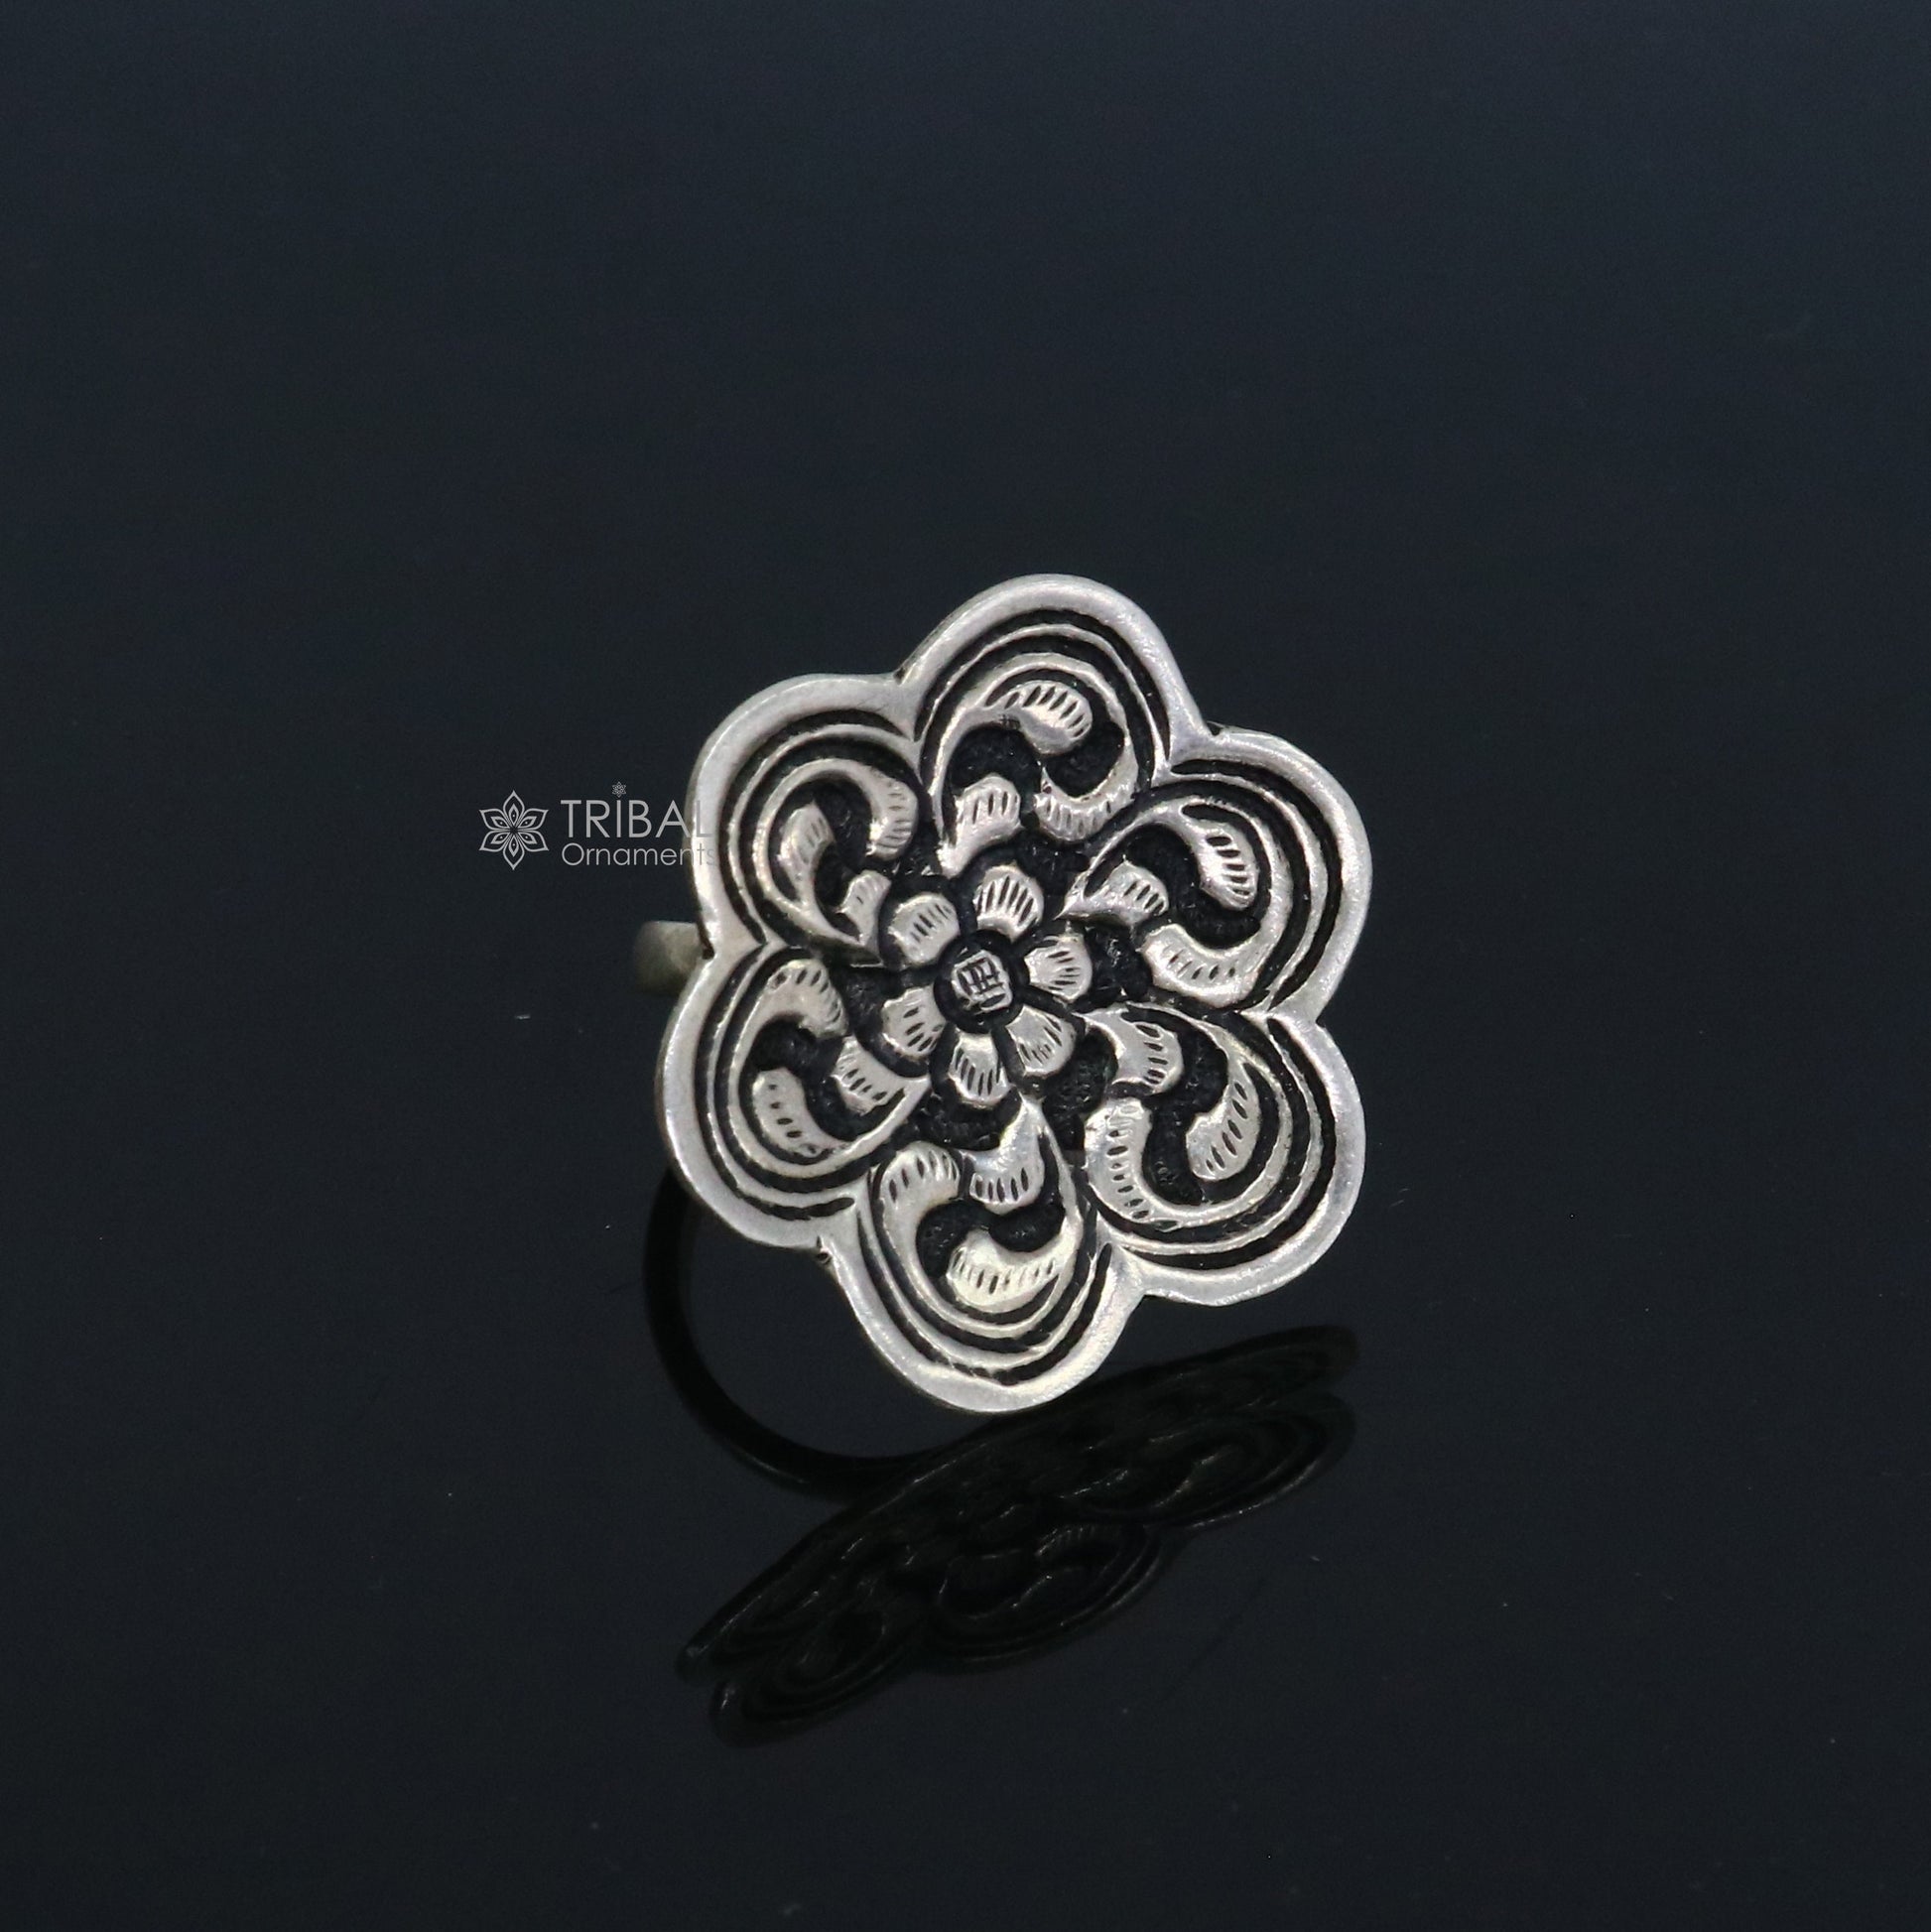 Traditional cultural flower design 925 sterling silver adjustable ring, best tribal ethnic jewelry for belly dance Navratri jewelry sr385 - TRIBAL ORNAMENTS